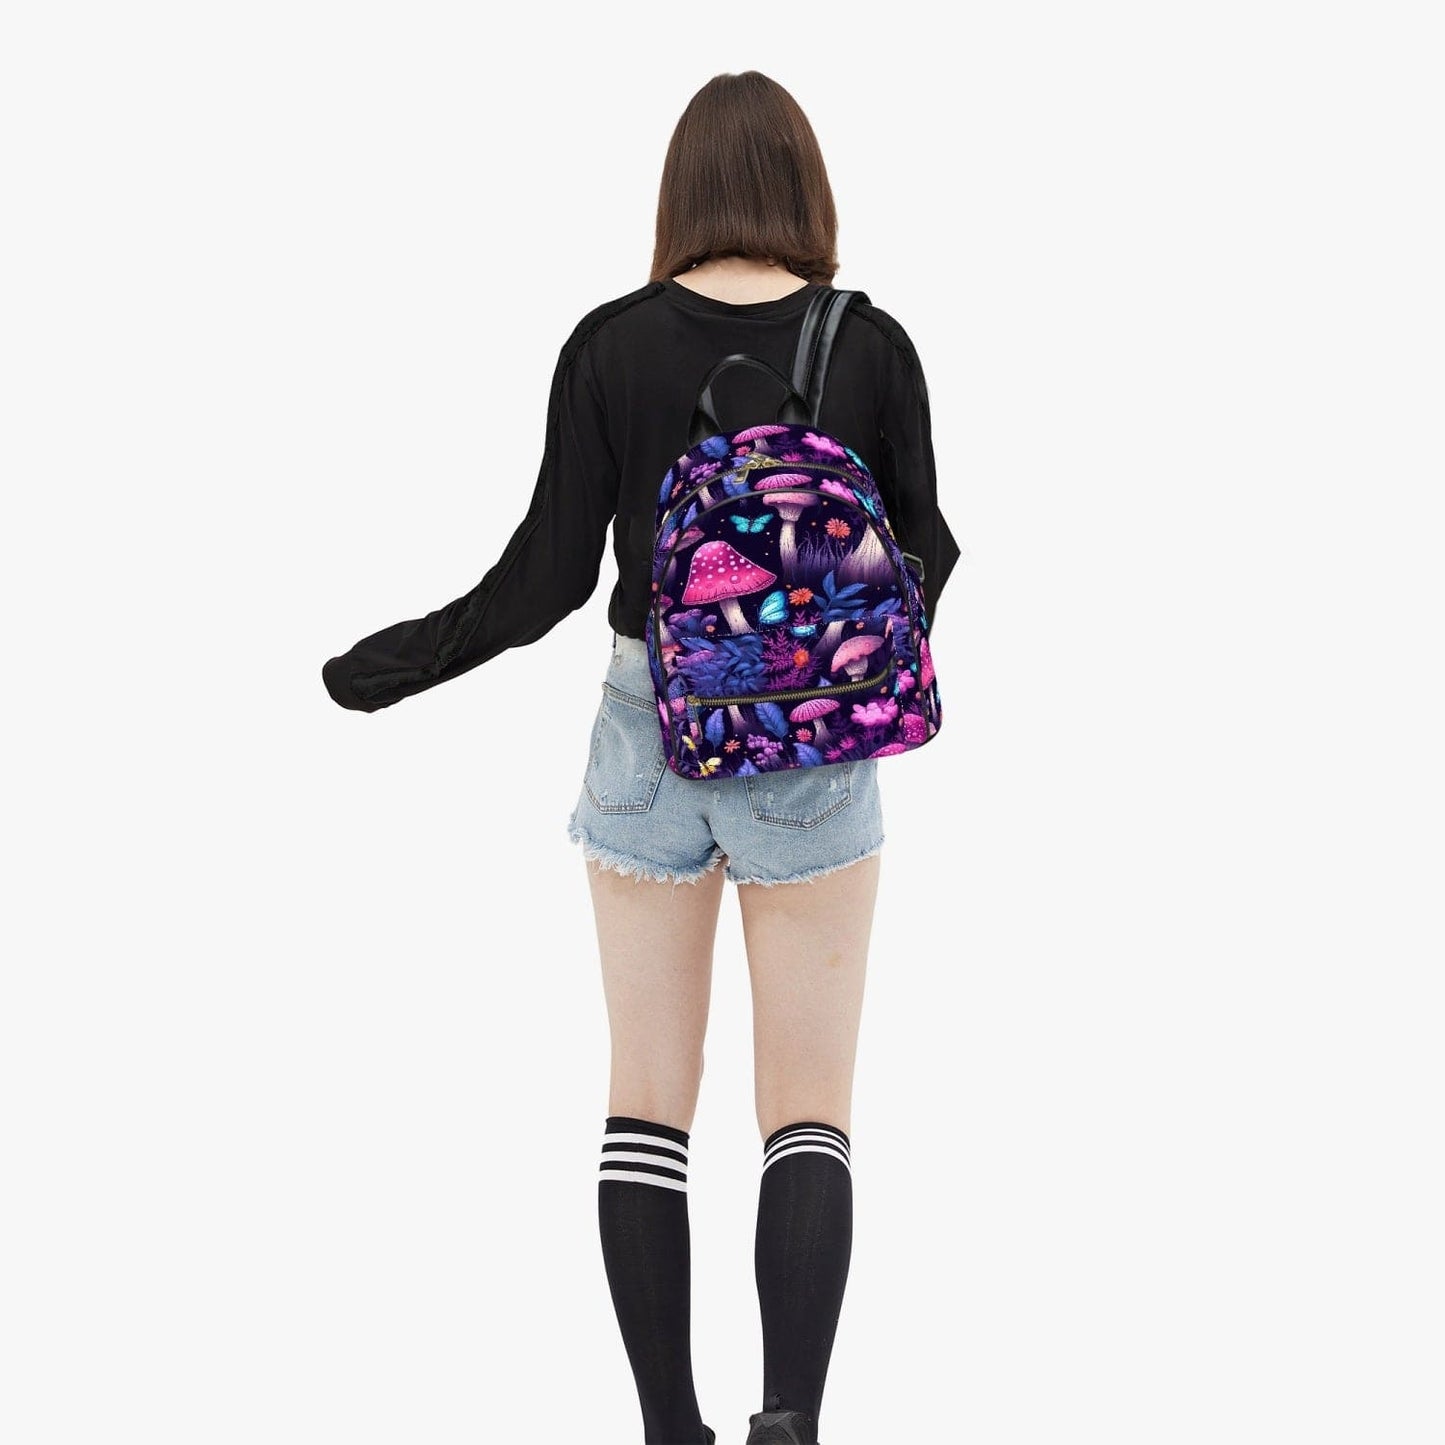 student carrying the backpack featuring a midnight garden of mushroomcore bright glowing pink and purple mushrooms printed on strong waterproof pu